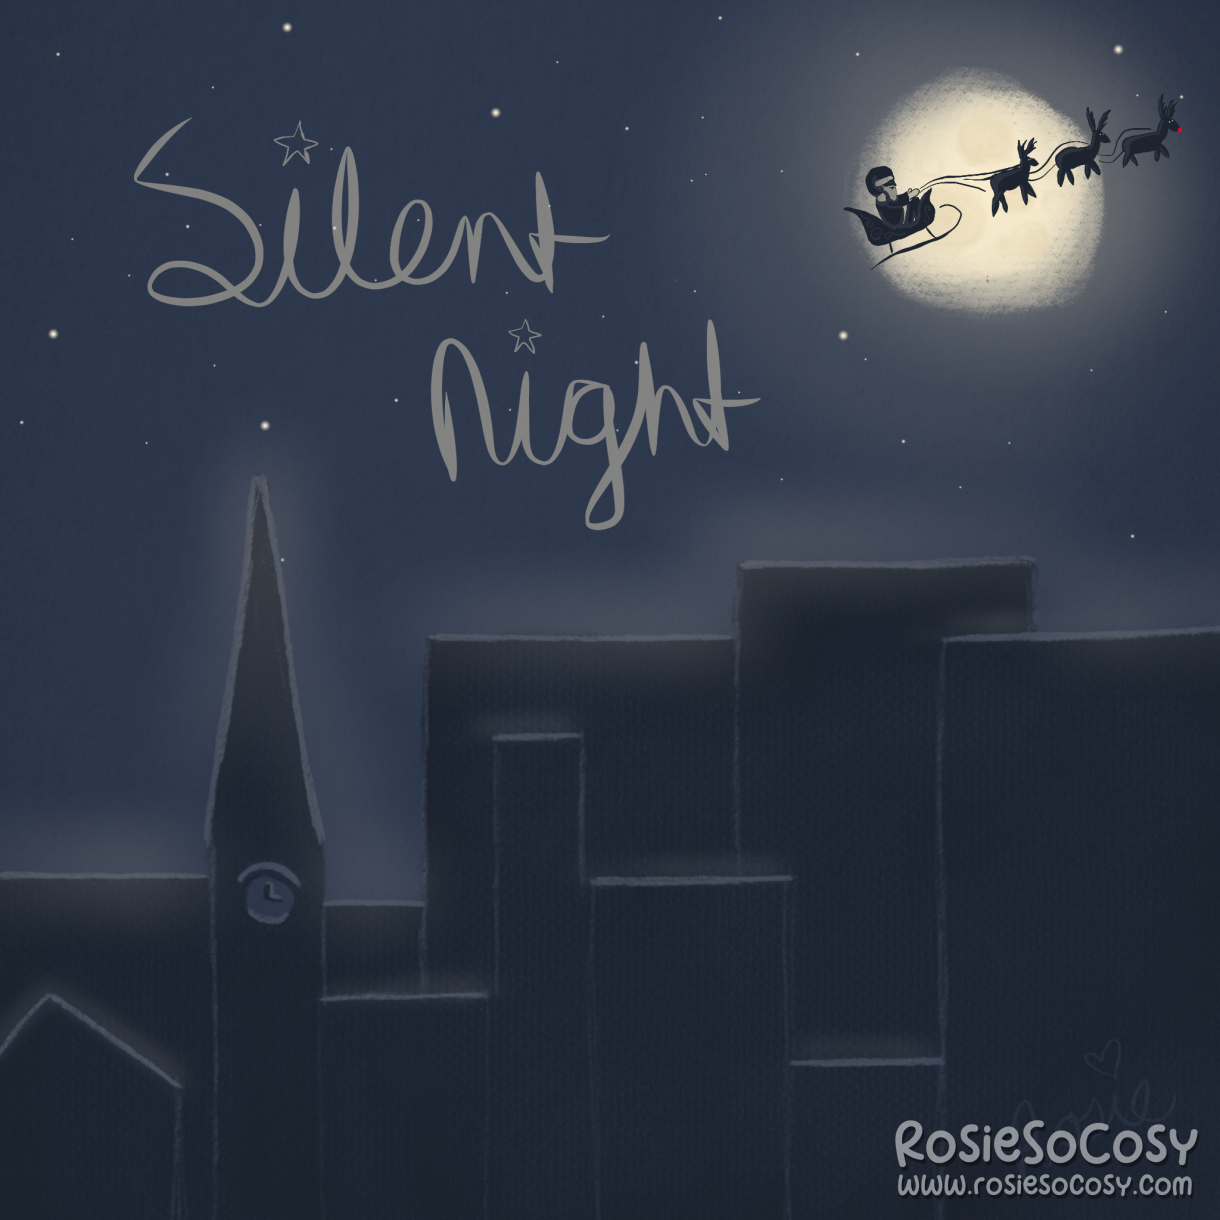 Silent Night. A quick drawing of a nighttime setting with a church and several high buildings in the sky. The buildings are all really dark blue silhouettes. The sky is a medium to dark blue and there's a white/yellow moon in it. On the left it says Silent Night, and on the right, over the moon, you can see Santa's sleigh with his reindeer.